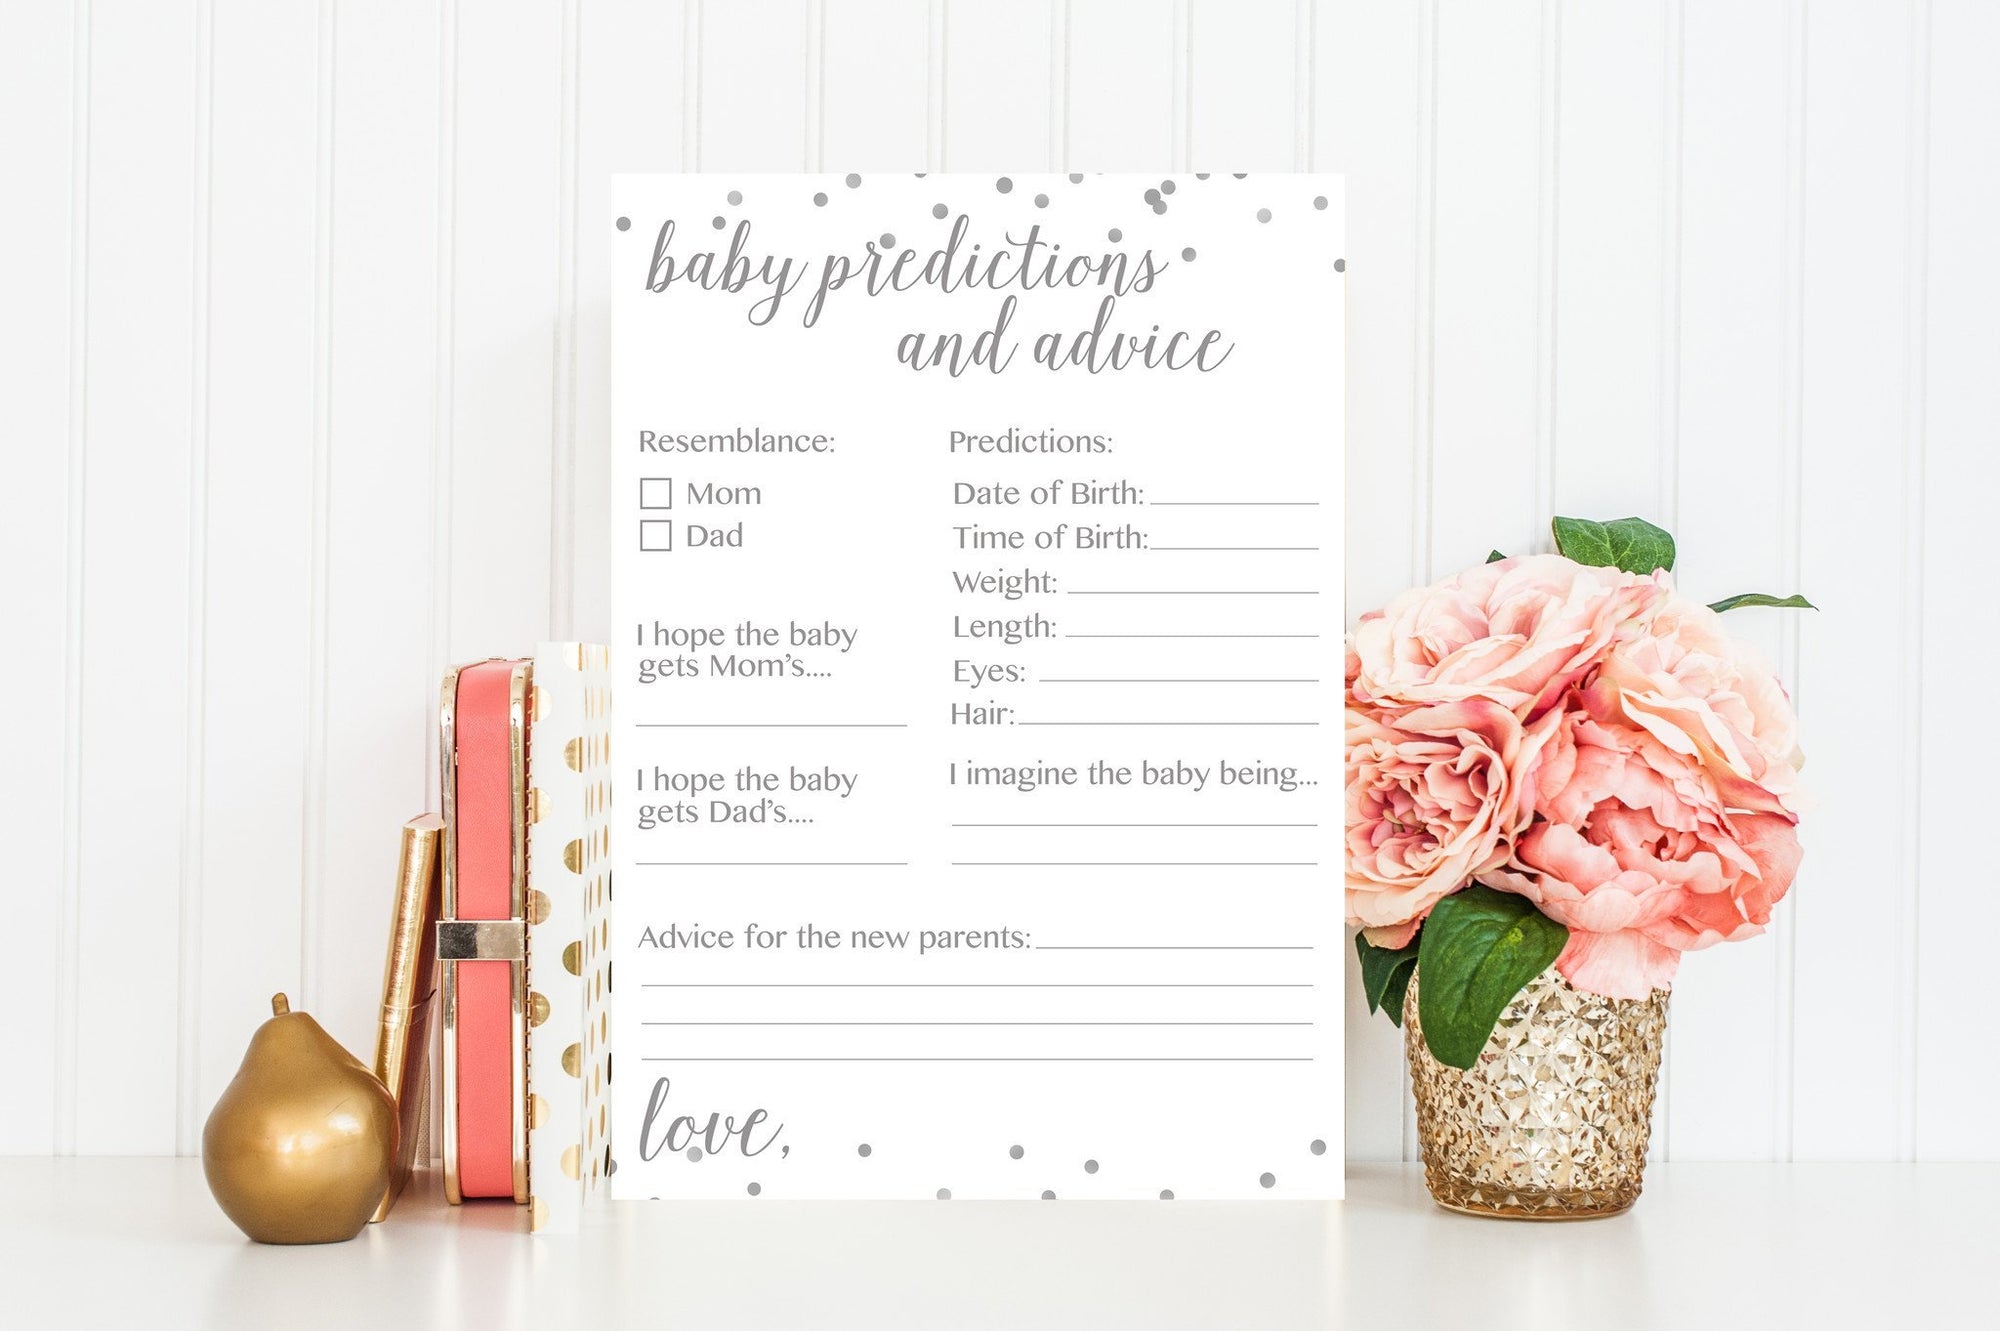 Baby Predictions and Advice - Grey Confetti Printable - Pretty Collected